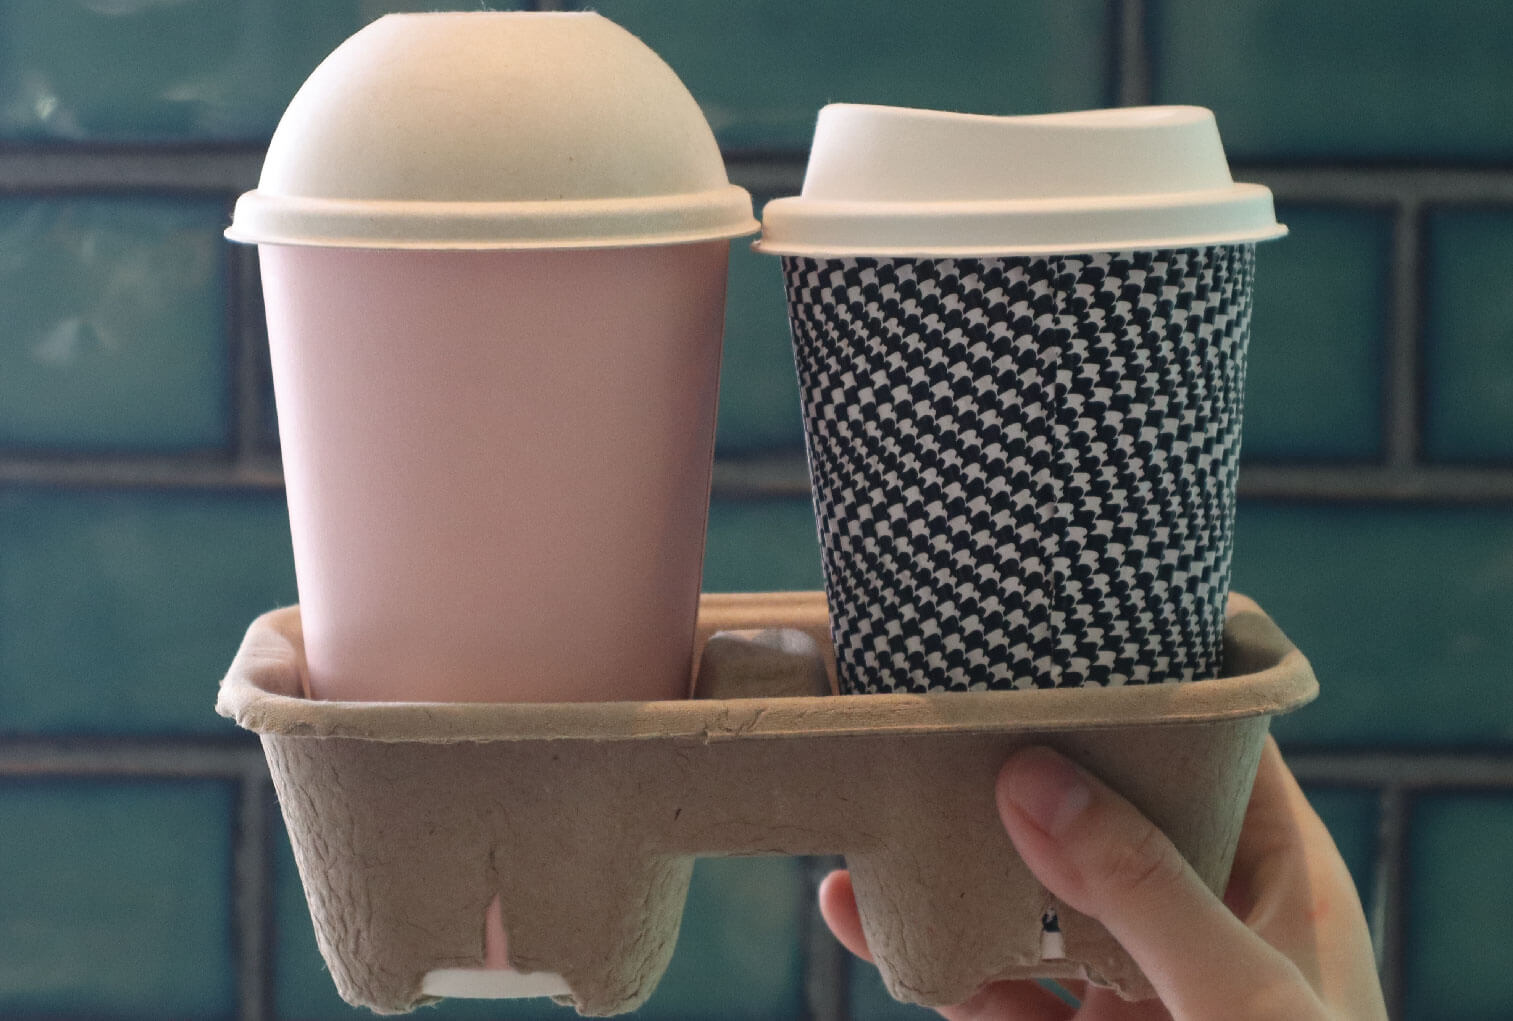 How to use custom to solve the problem that the cup lid cover does not match the cup